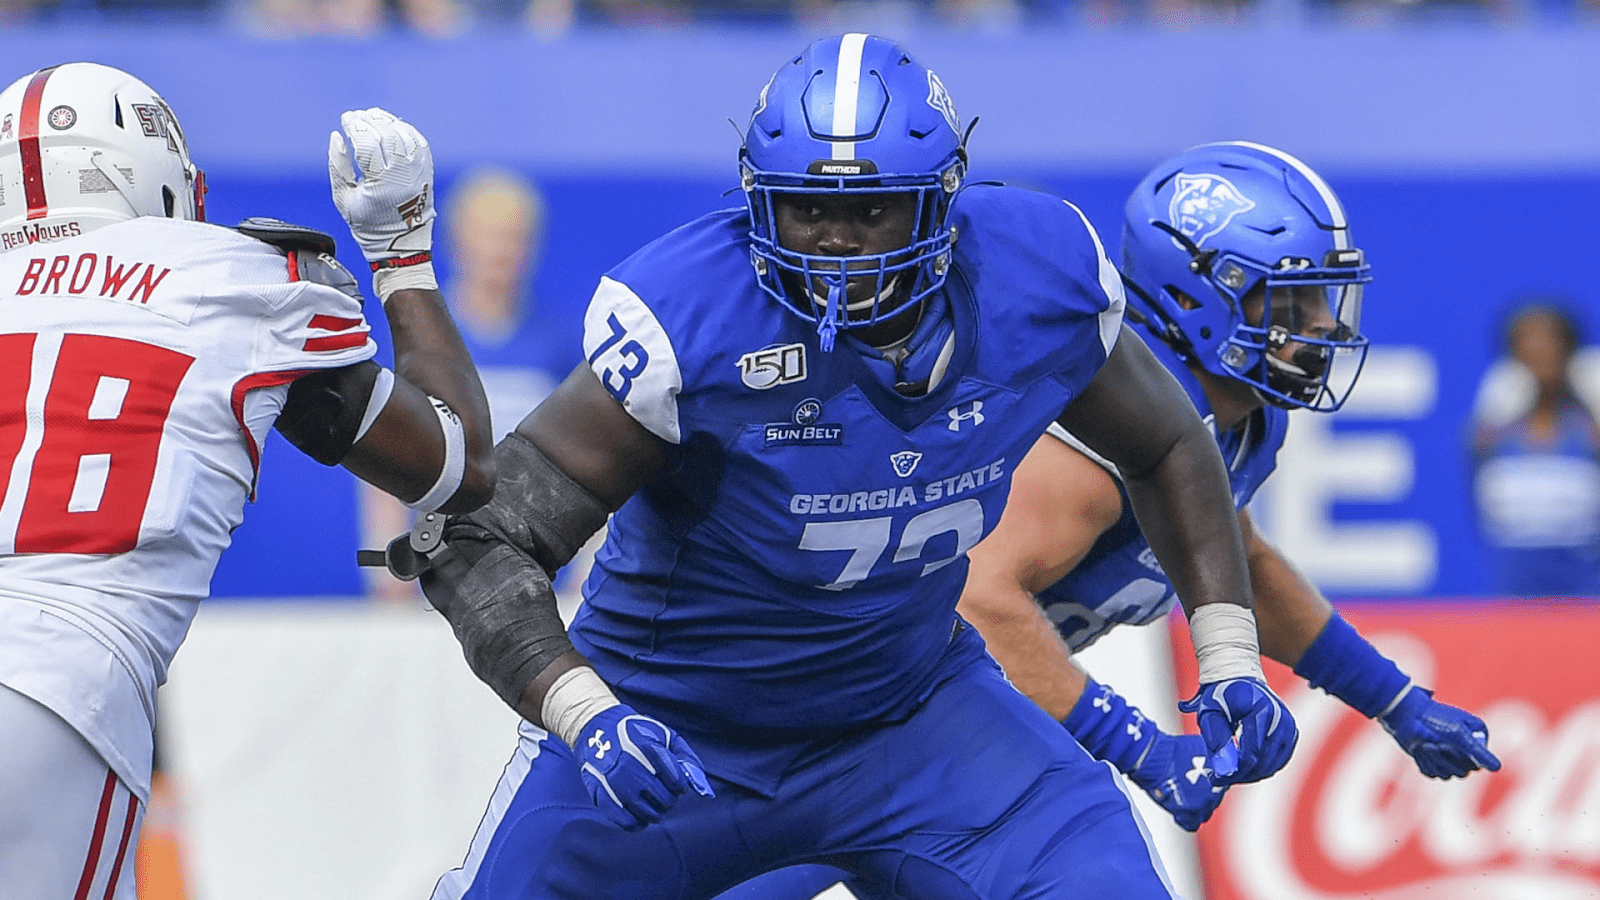 Travis Glover has massive size and displays good strength and versatility on the Georgia State offensive line. Hula Bowl scout Tully Hannah breaks down the strengths and weaknesses of Glover as an NFL Prospect in this article.